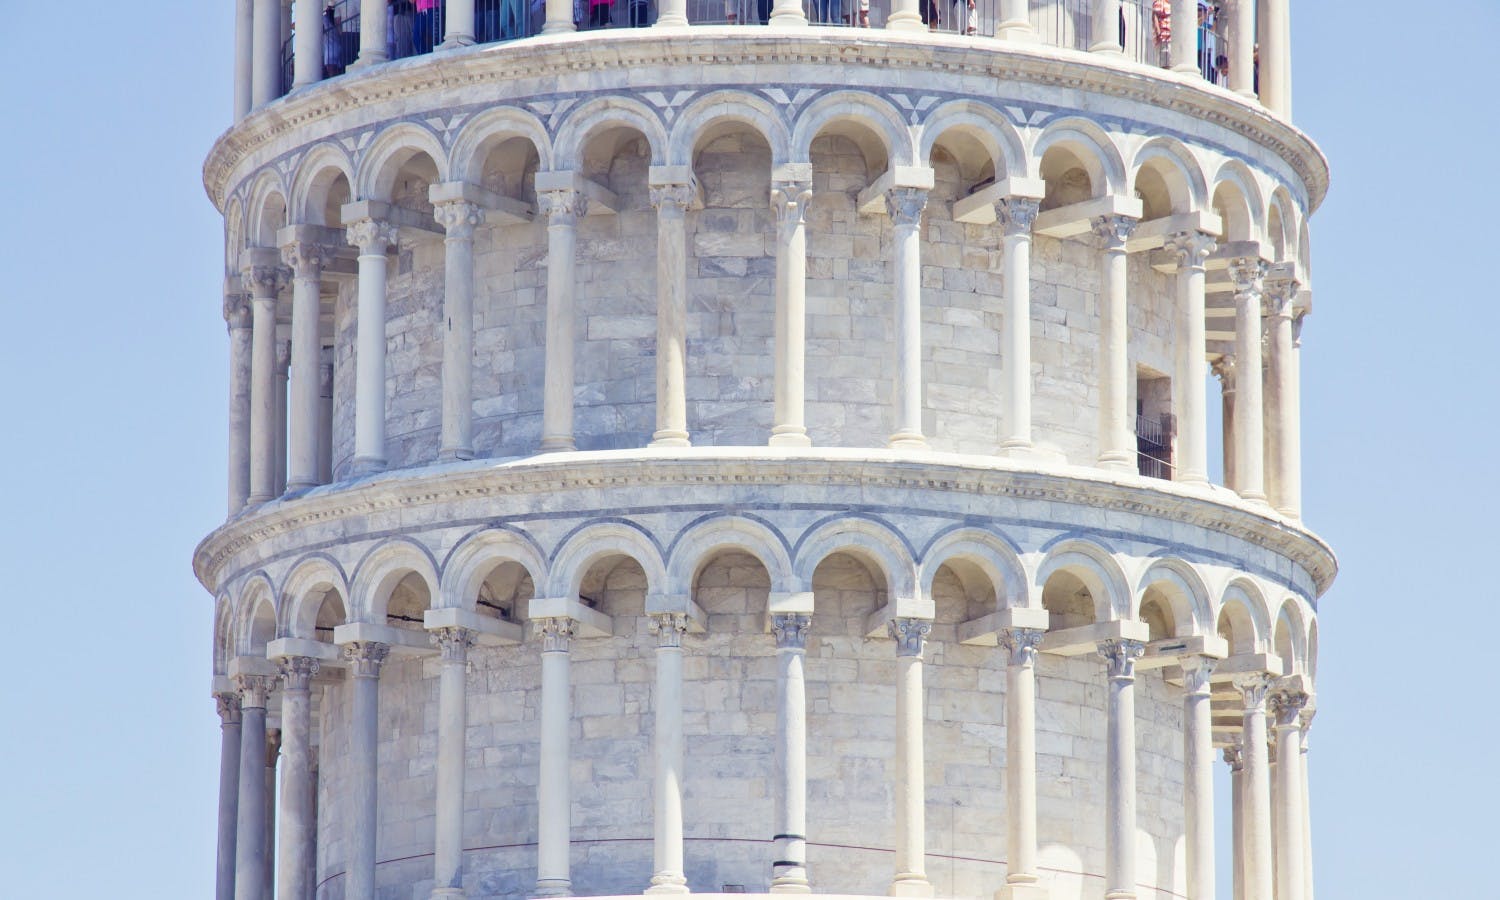 Square of Miracles Afternoon Tour and the Leaning Tower: Skip the line Tickets with Cathedral